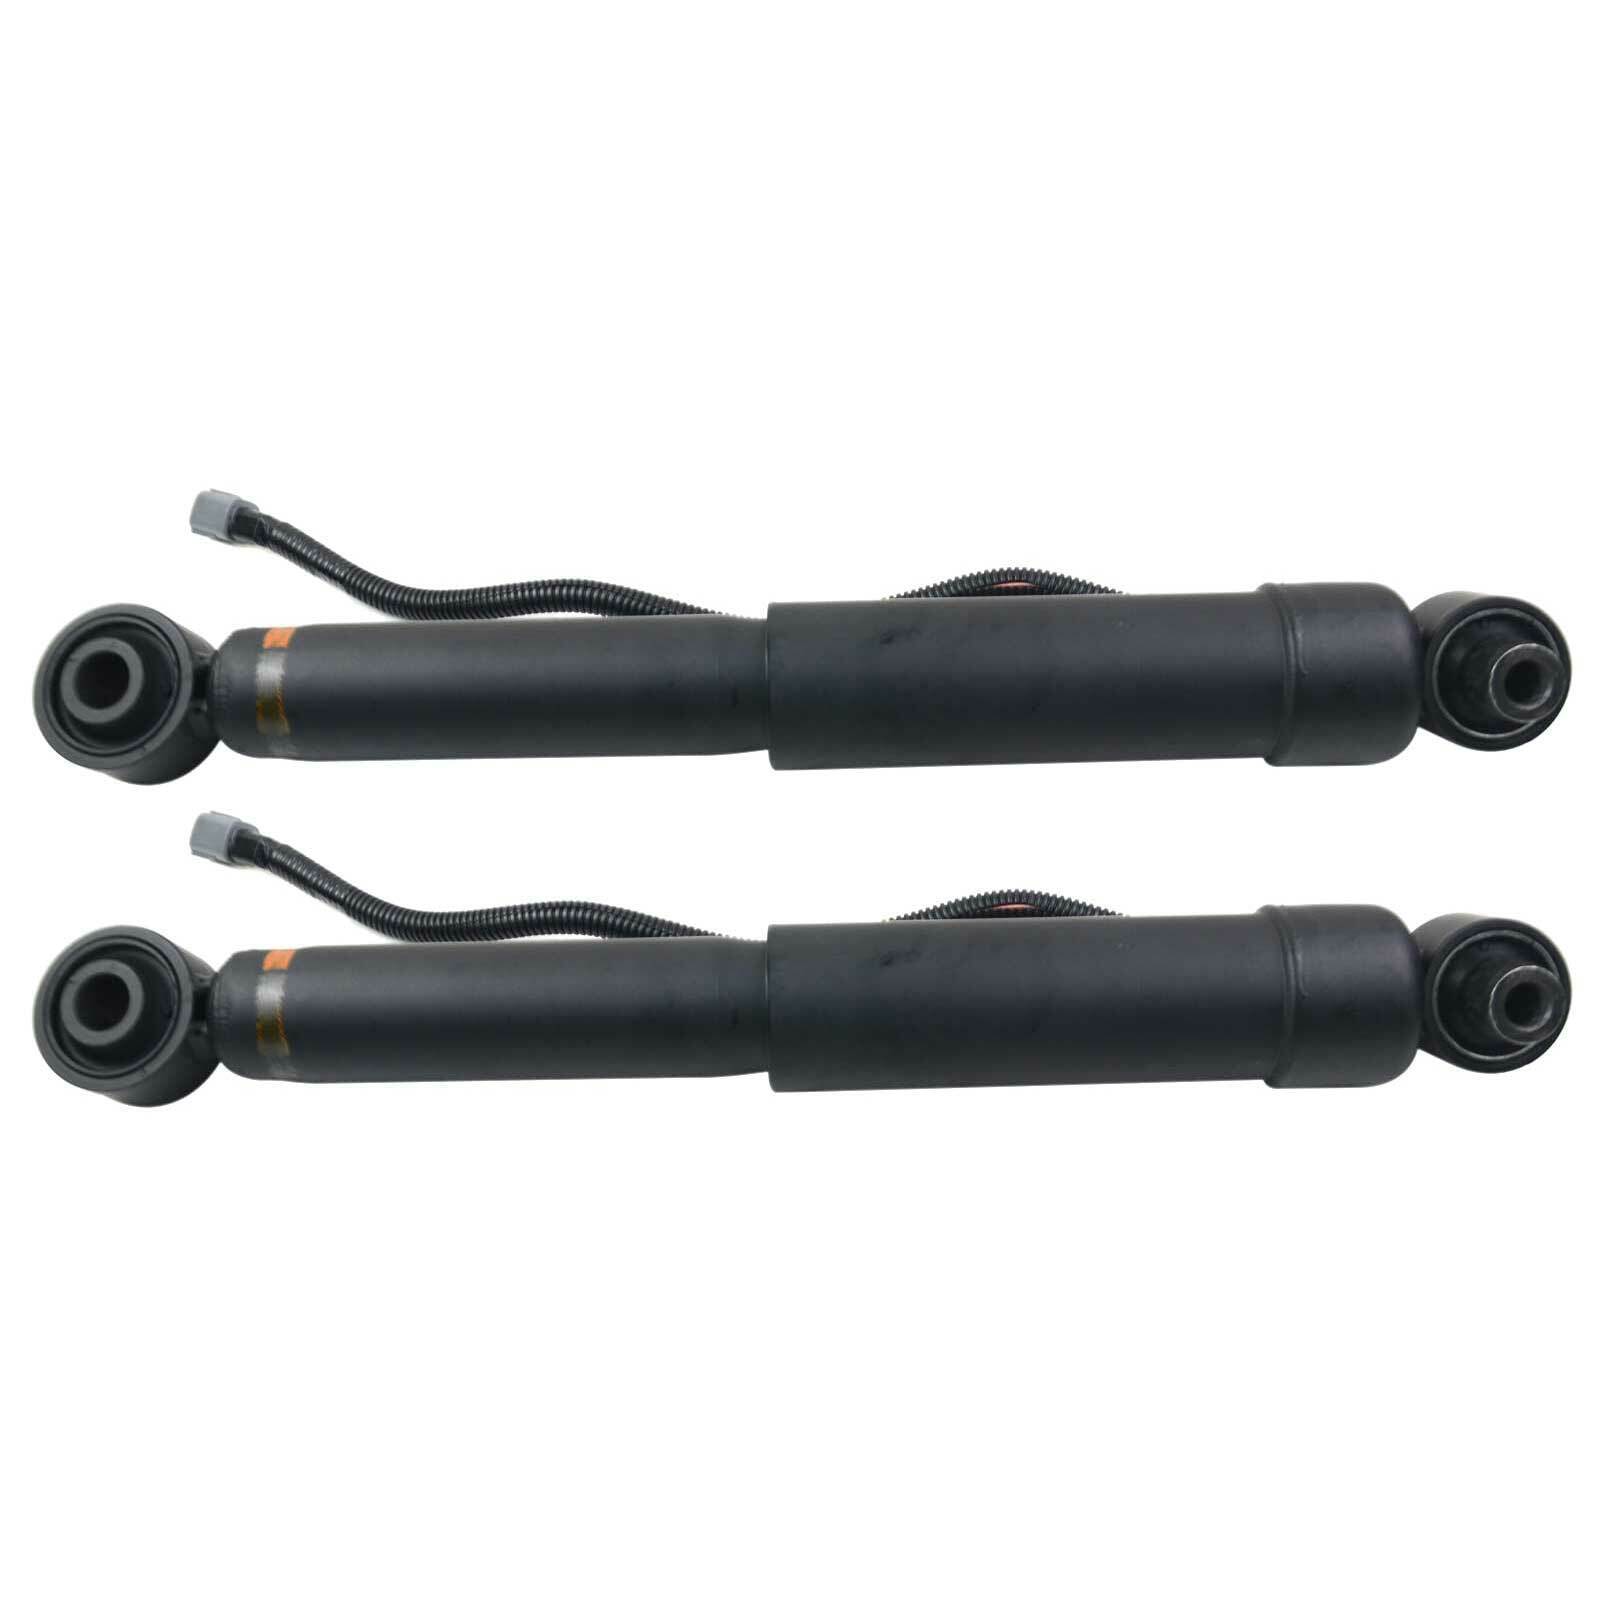 1 Pair Rear Shock Absorbers 4853034051 for 2008-2019 Toyota Sequoia 5.7L V8